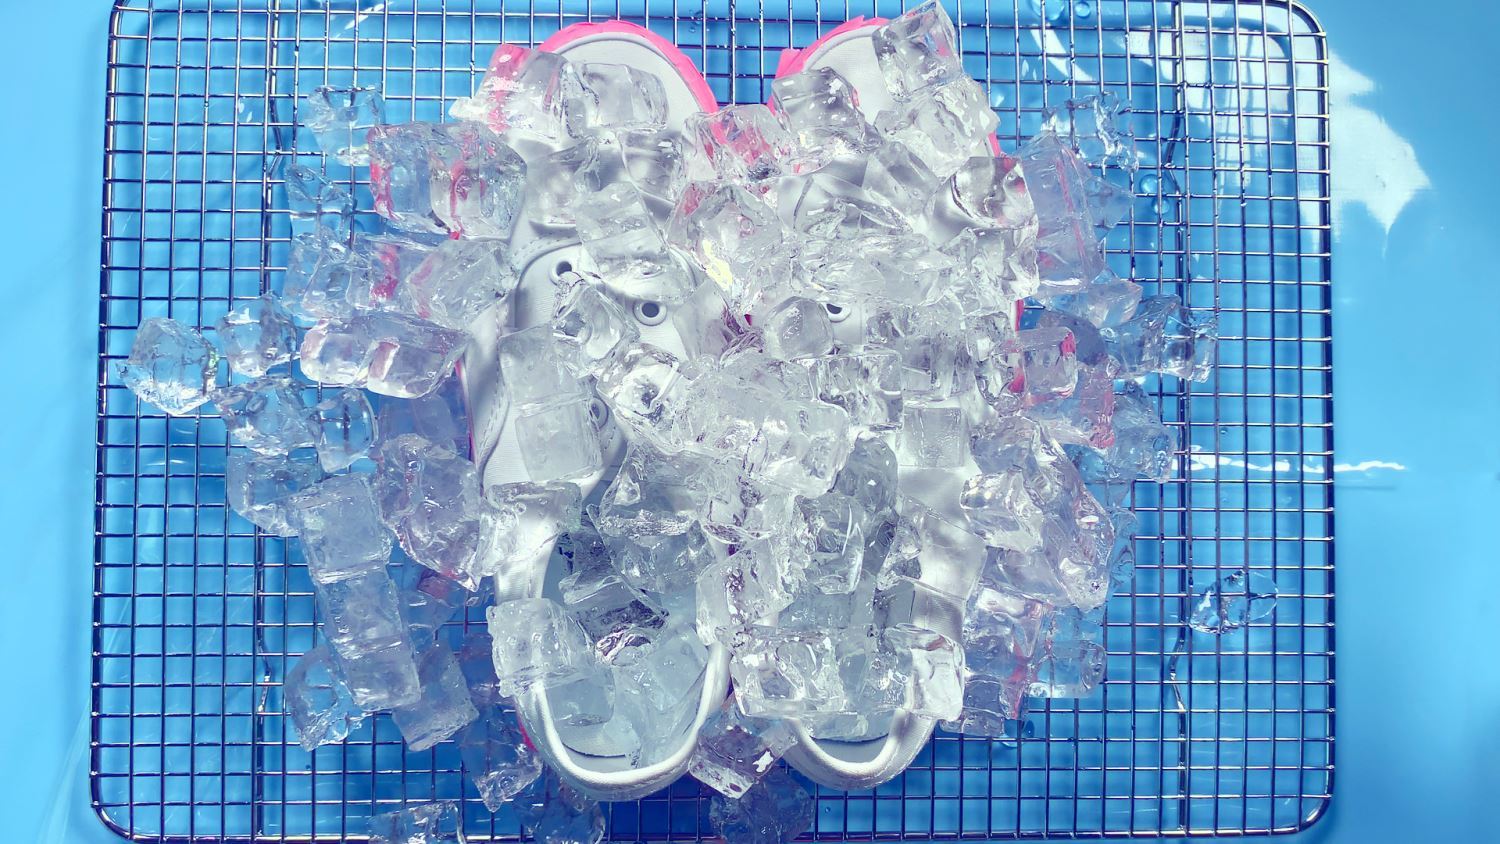 Pile ice over shoes